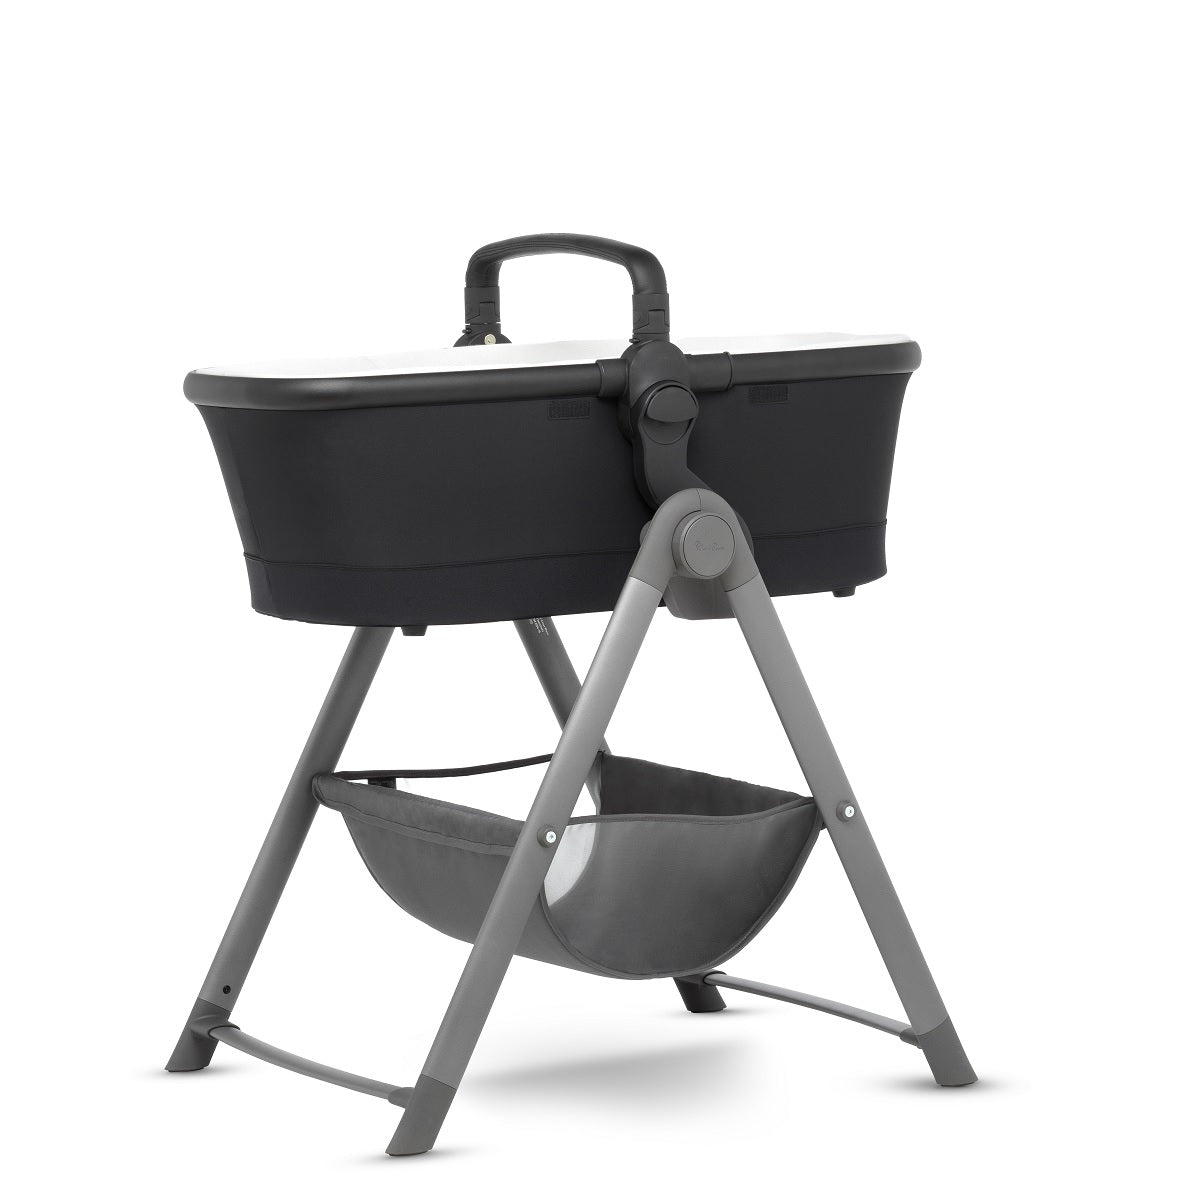 silver cross wave carrycot